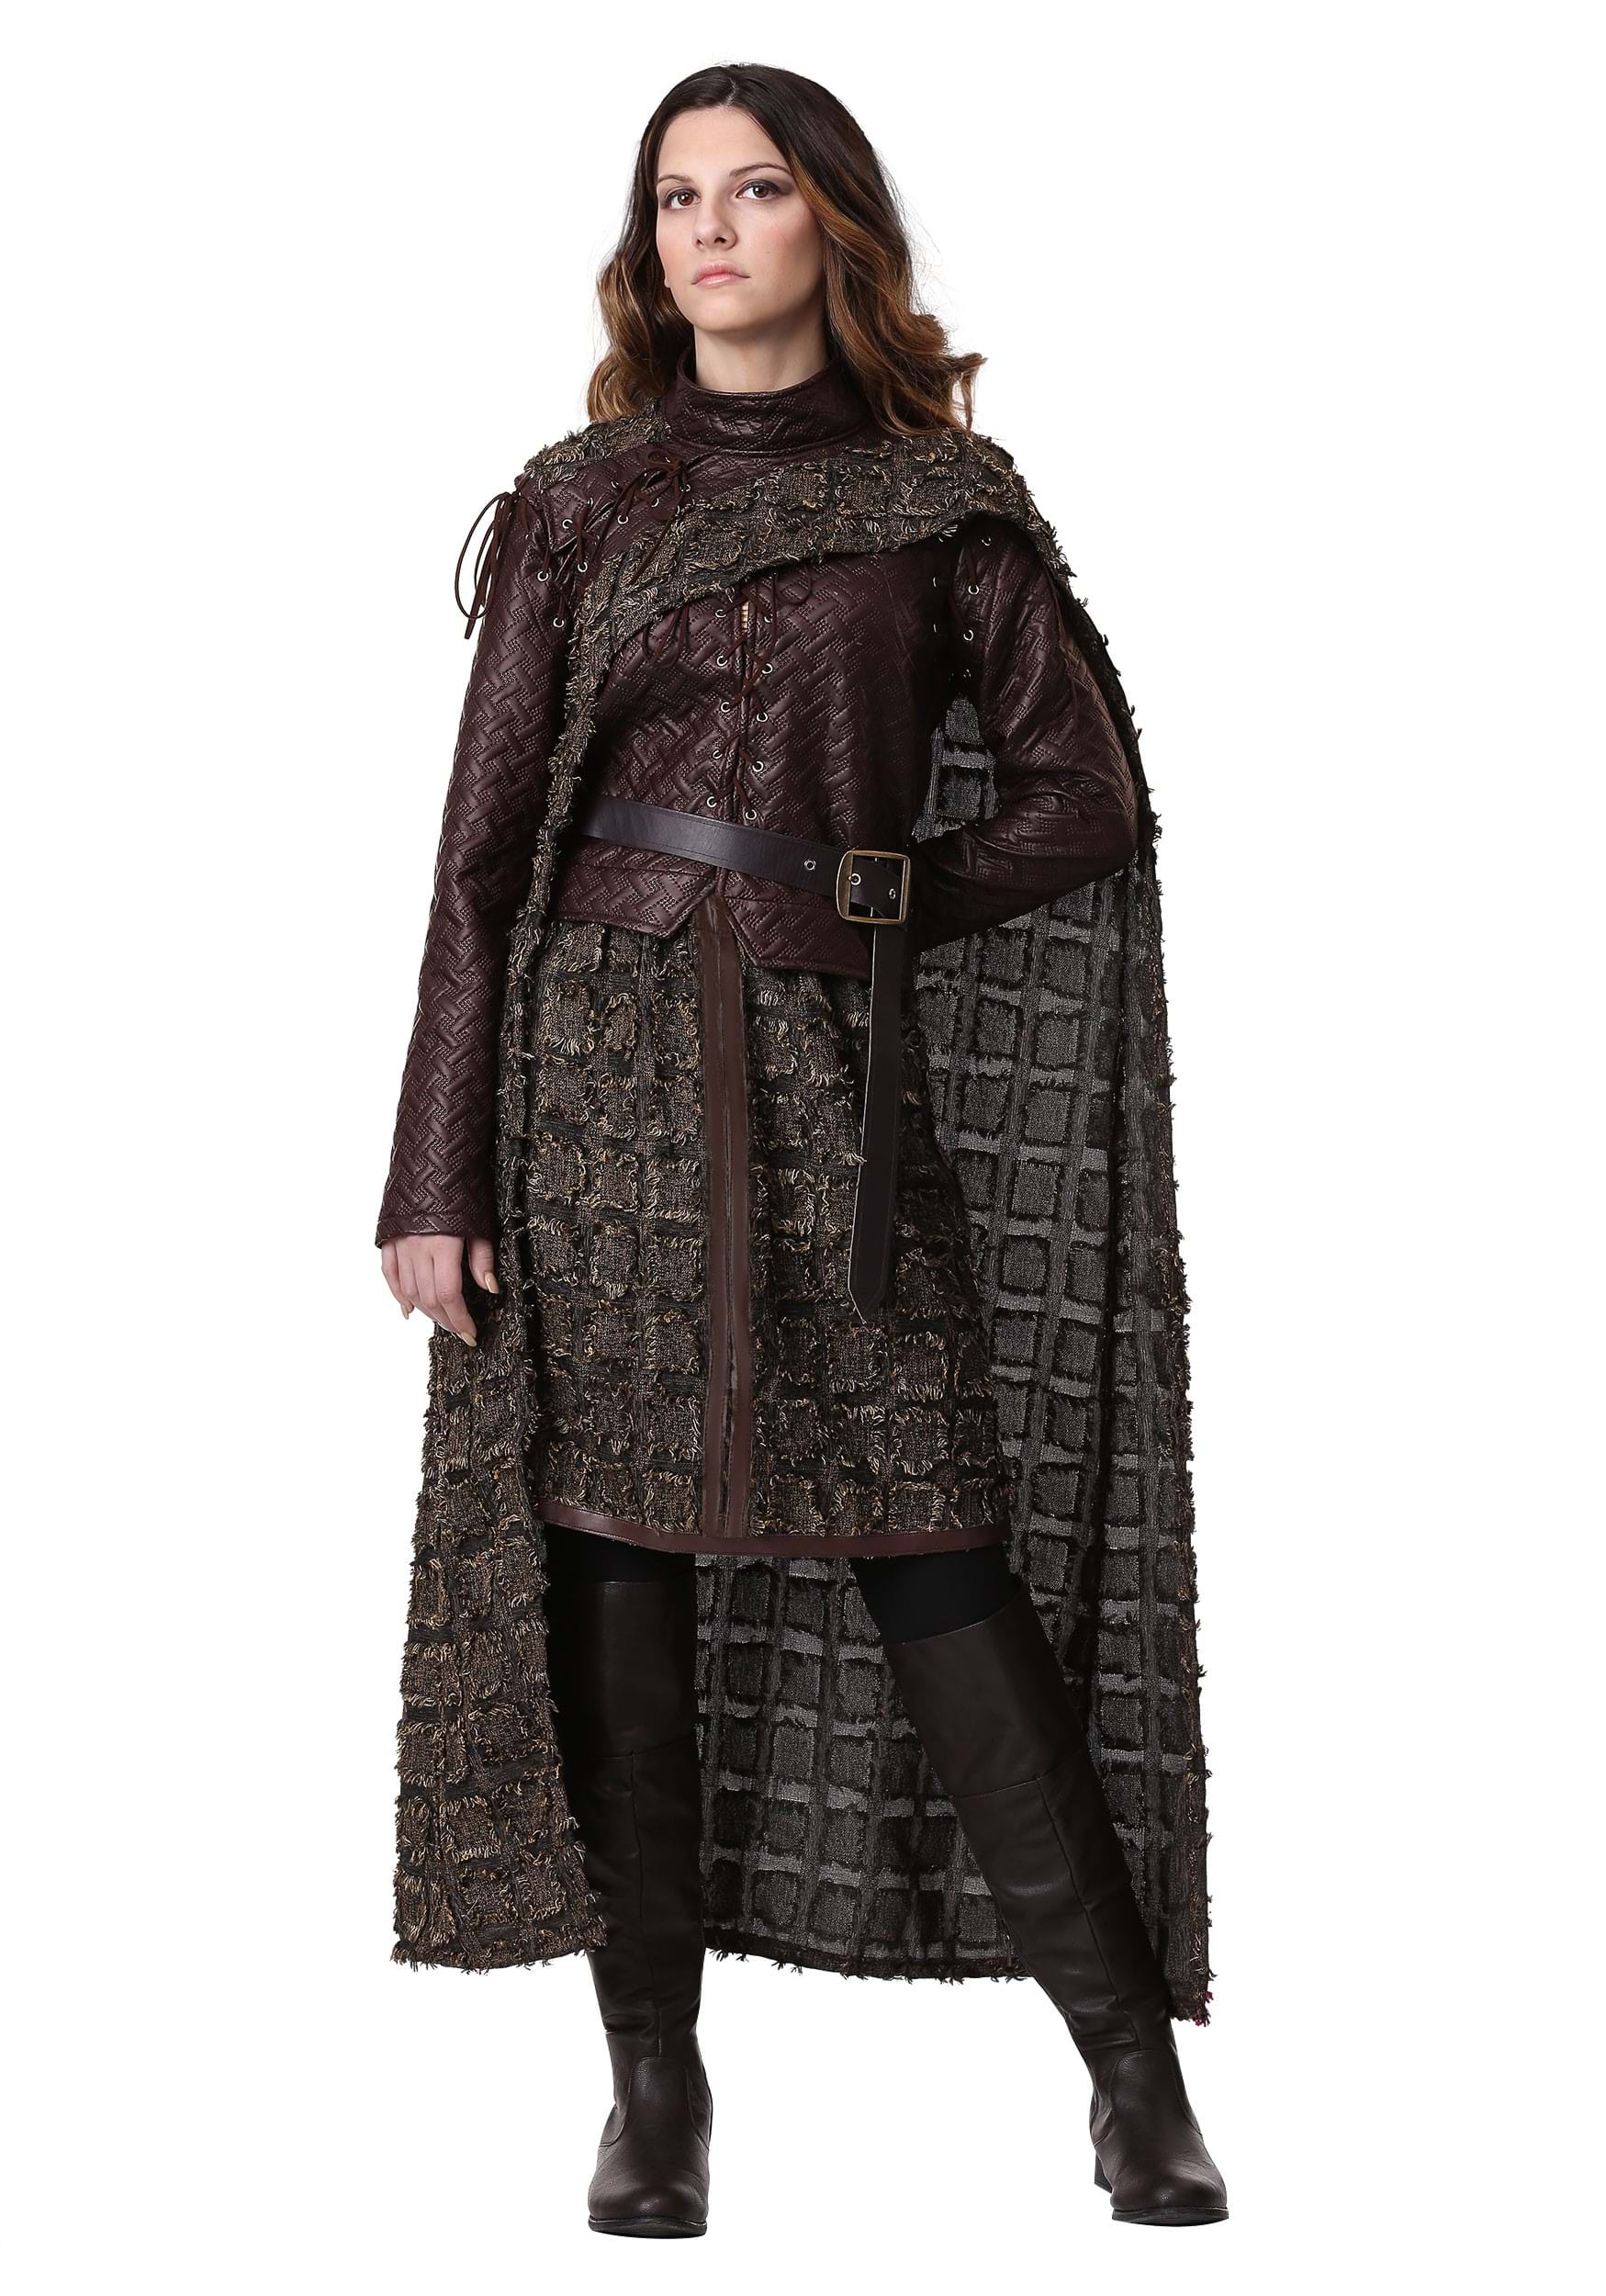 Image of Women's Winter Warrior Costume with Cape & Jacket ID FUN6363AD-XS